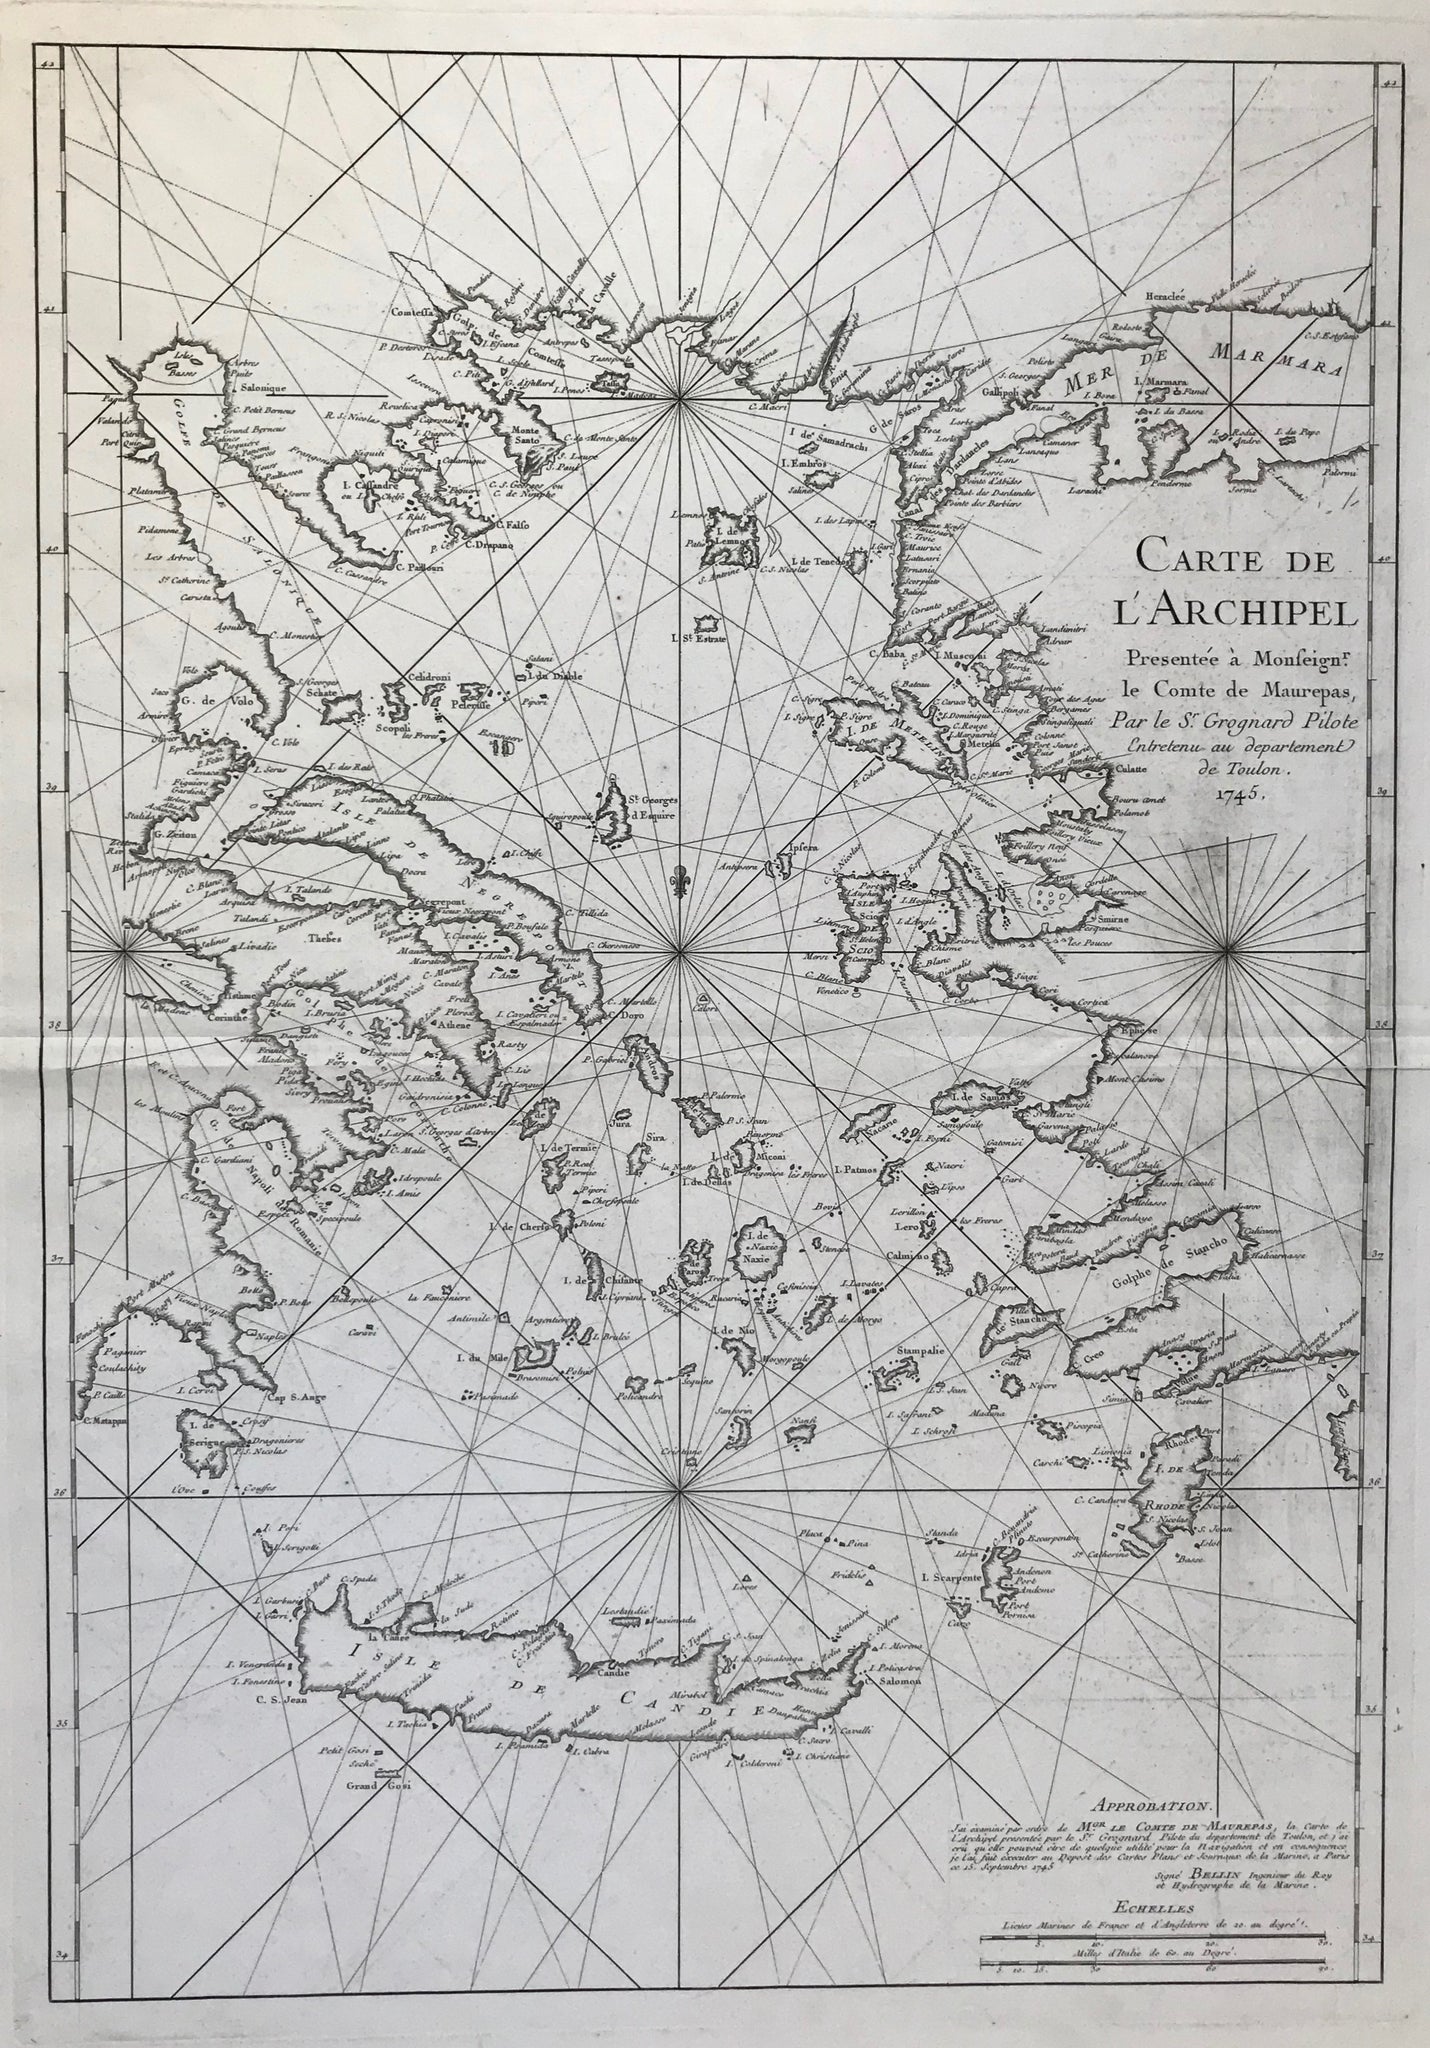 "Carte de L'Archipel Presentee a Monseignr. le Comte de Maurepas Par le Sr. Grognard Pilote Entretenu au department de Toulon. 1745"  Giant folio size map of the Aegean Sea (Eastern Mediterranean Sea) showing in great detail the East and North Coasts of Greece, the Dardanelles, the Sea of Marmara, the West Coast of Turkey and all the islands south to Crete (Kreta)  Type of print: Copperplate etching  Publisher: Nicolas Bellin